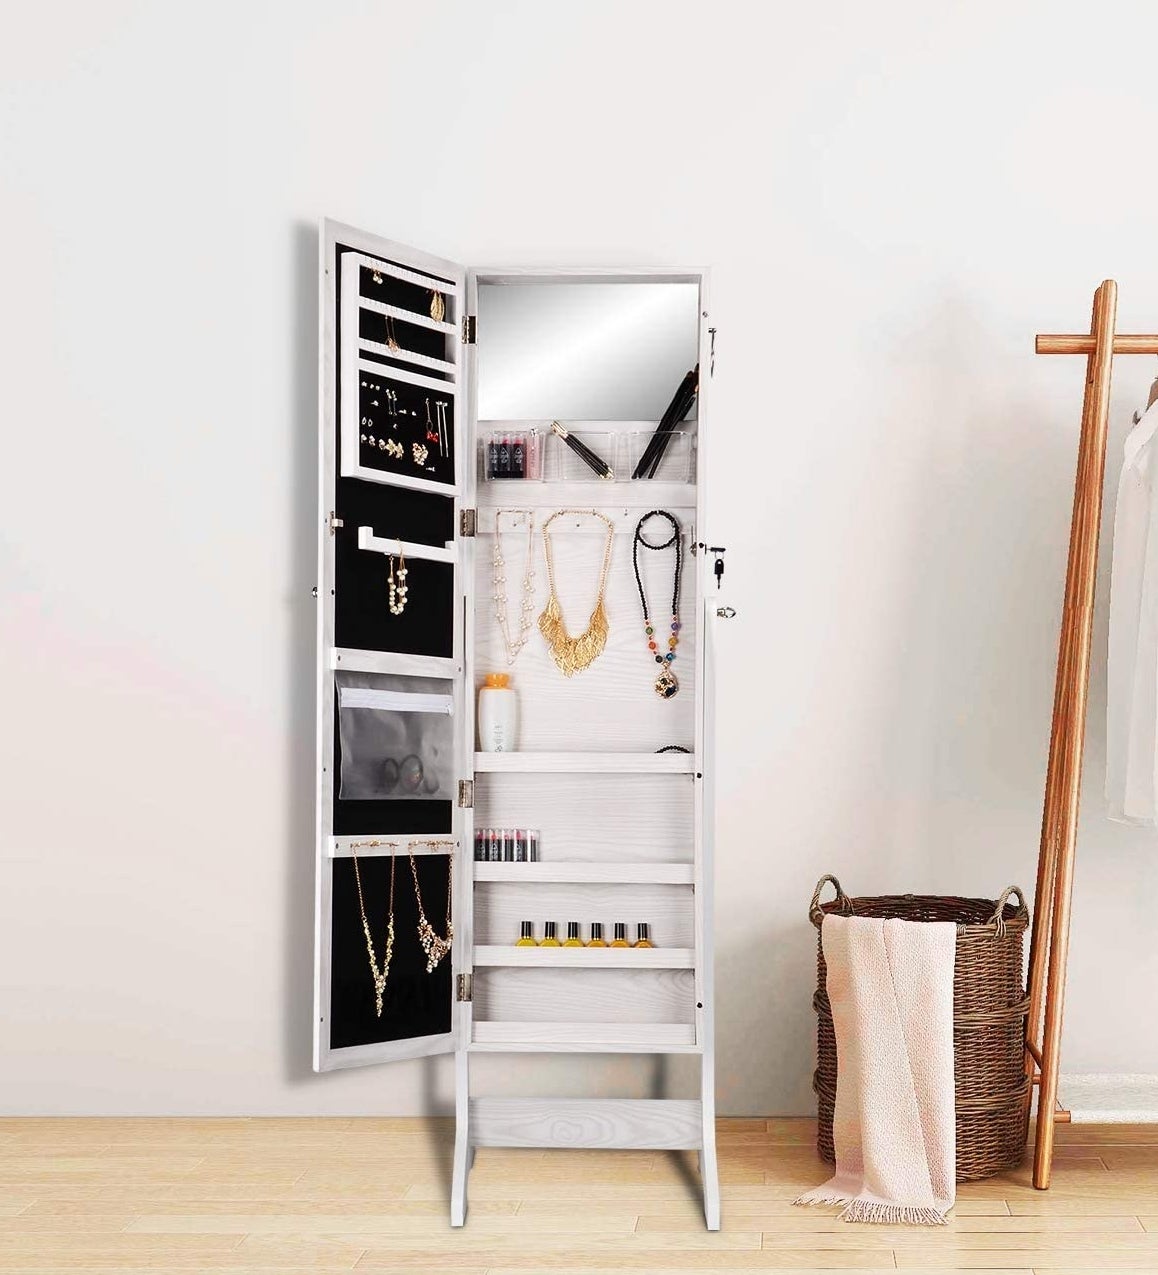 a stylish mirror opened to show its inner shelves and storage space